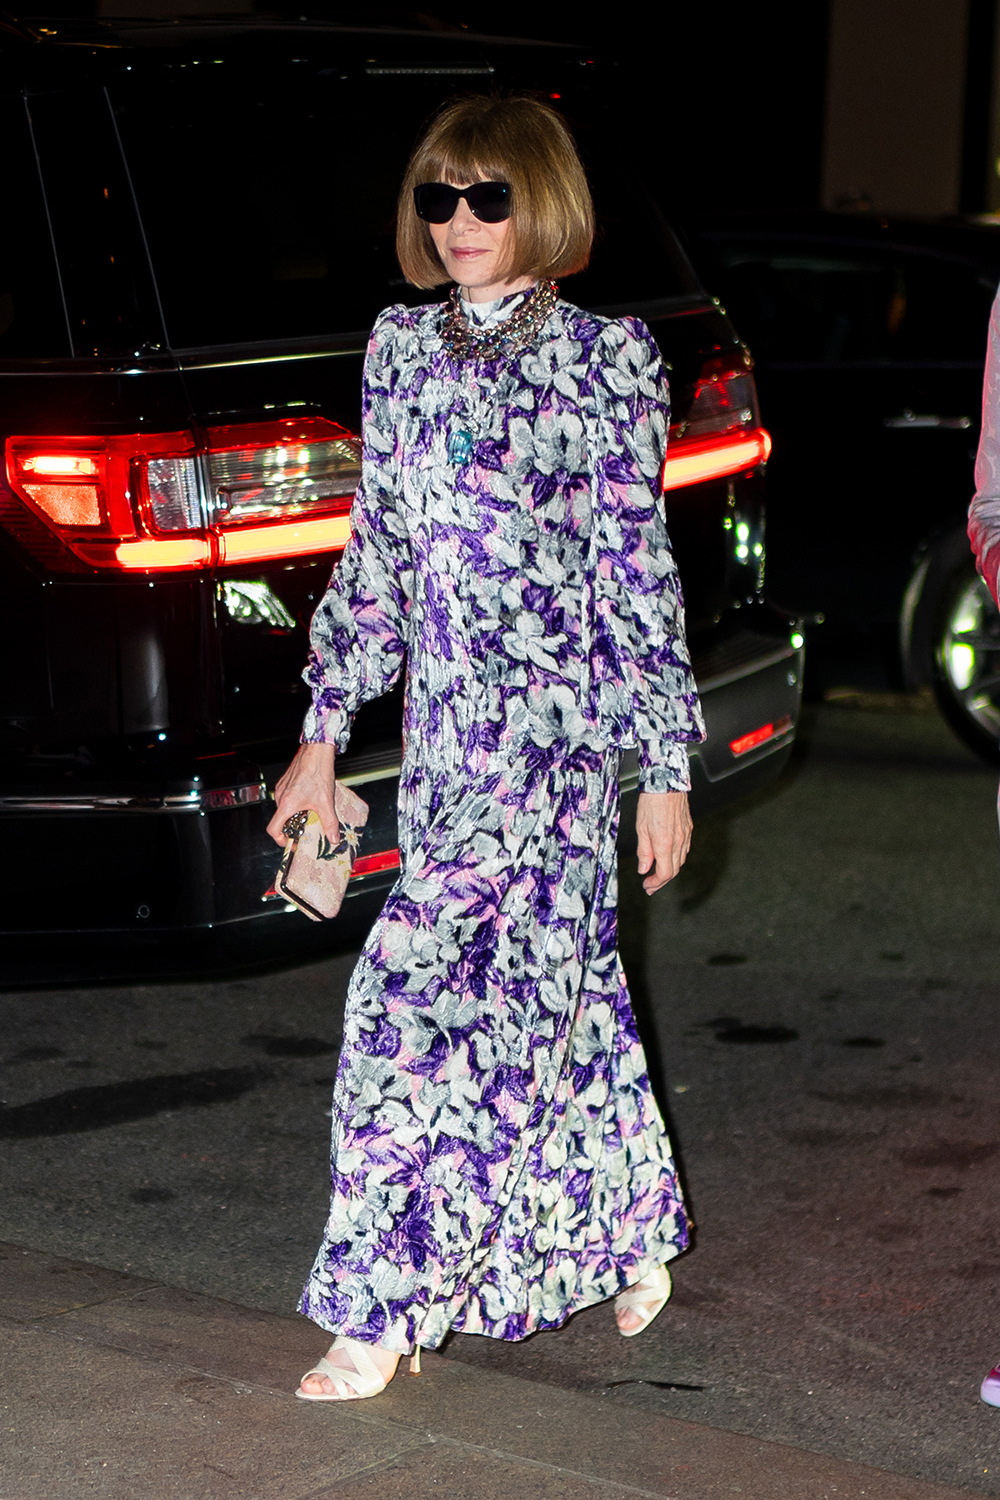 Even Anna Wintour was in attendance at Marc Jacobs' wedding.